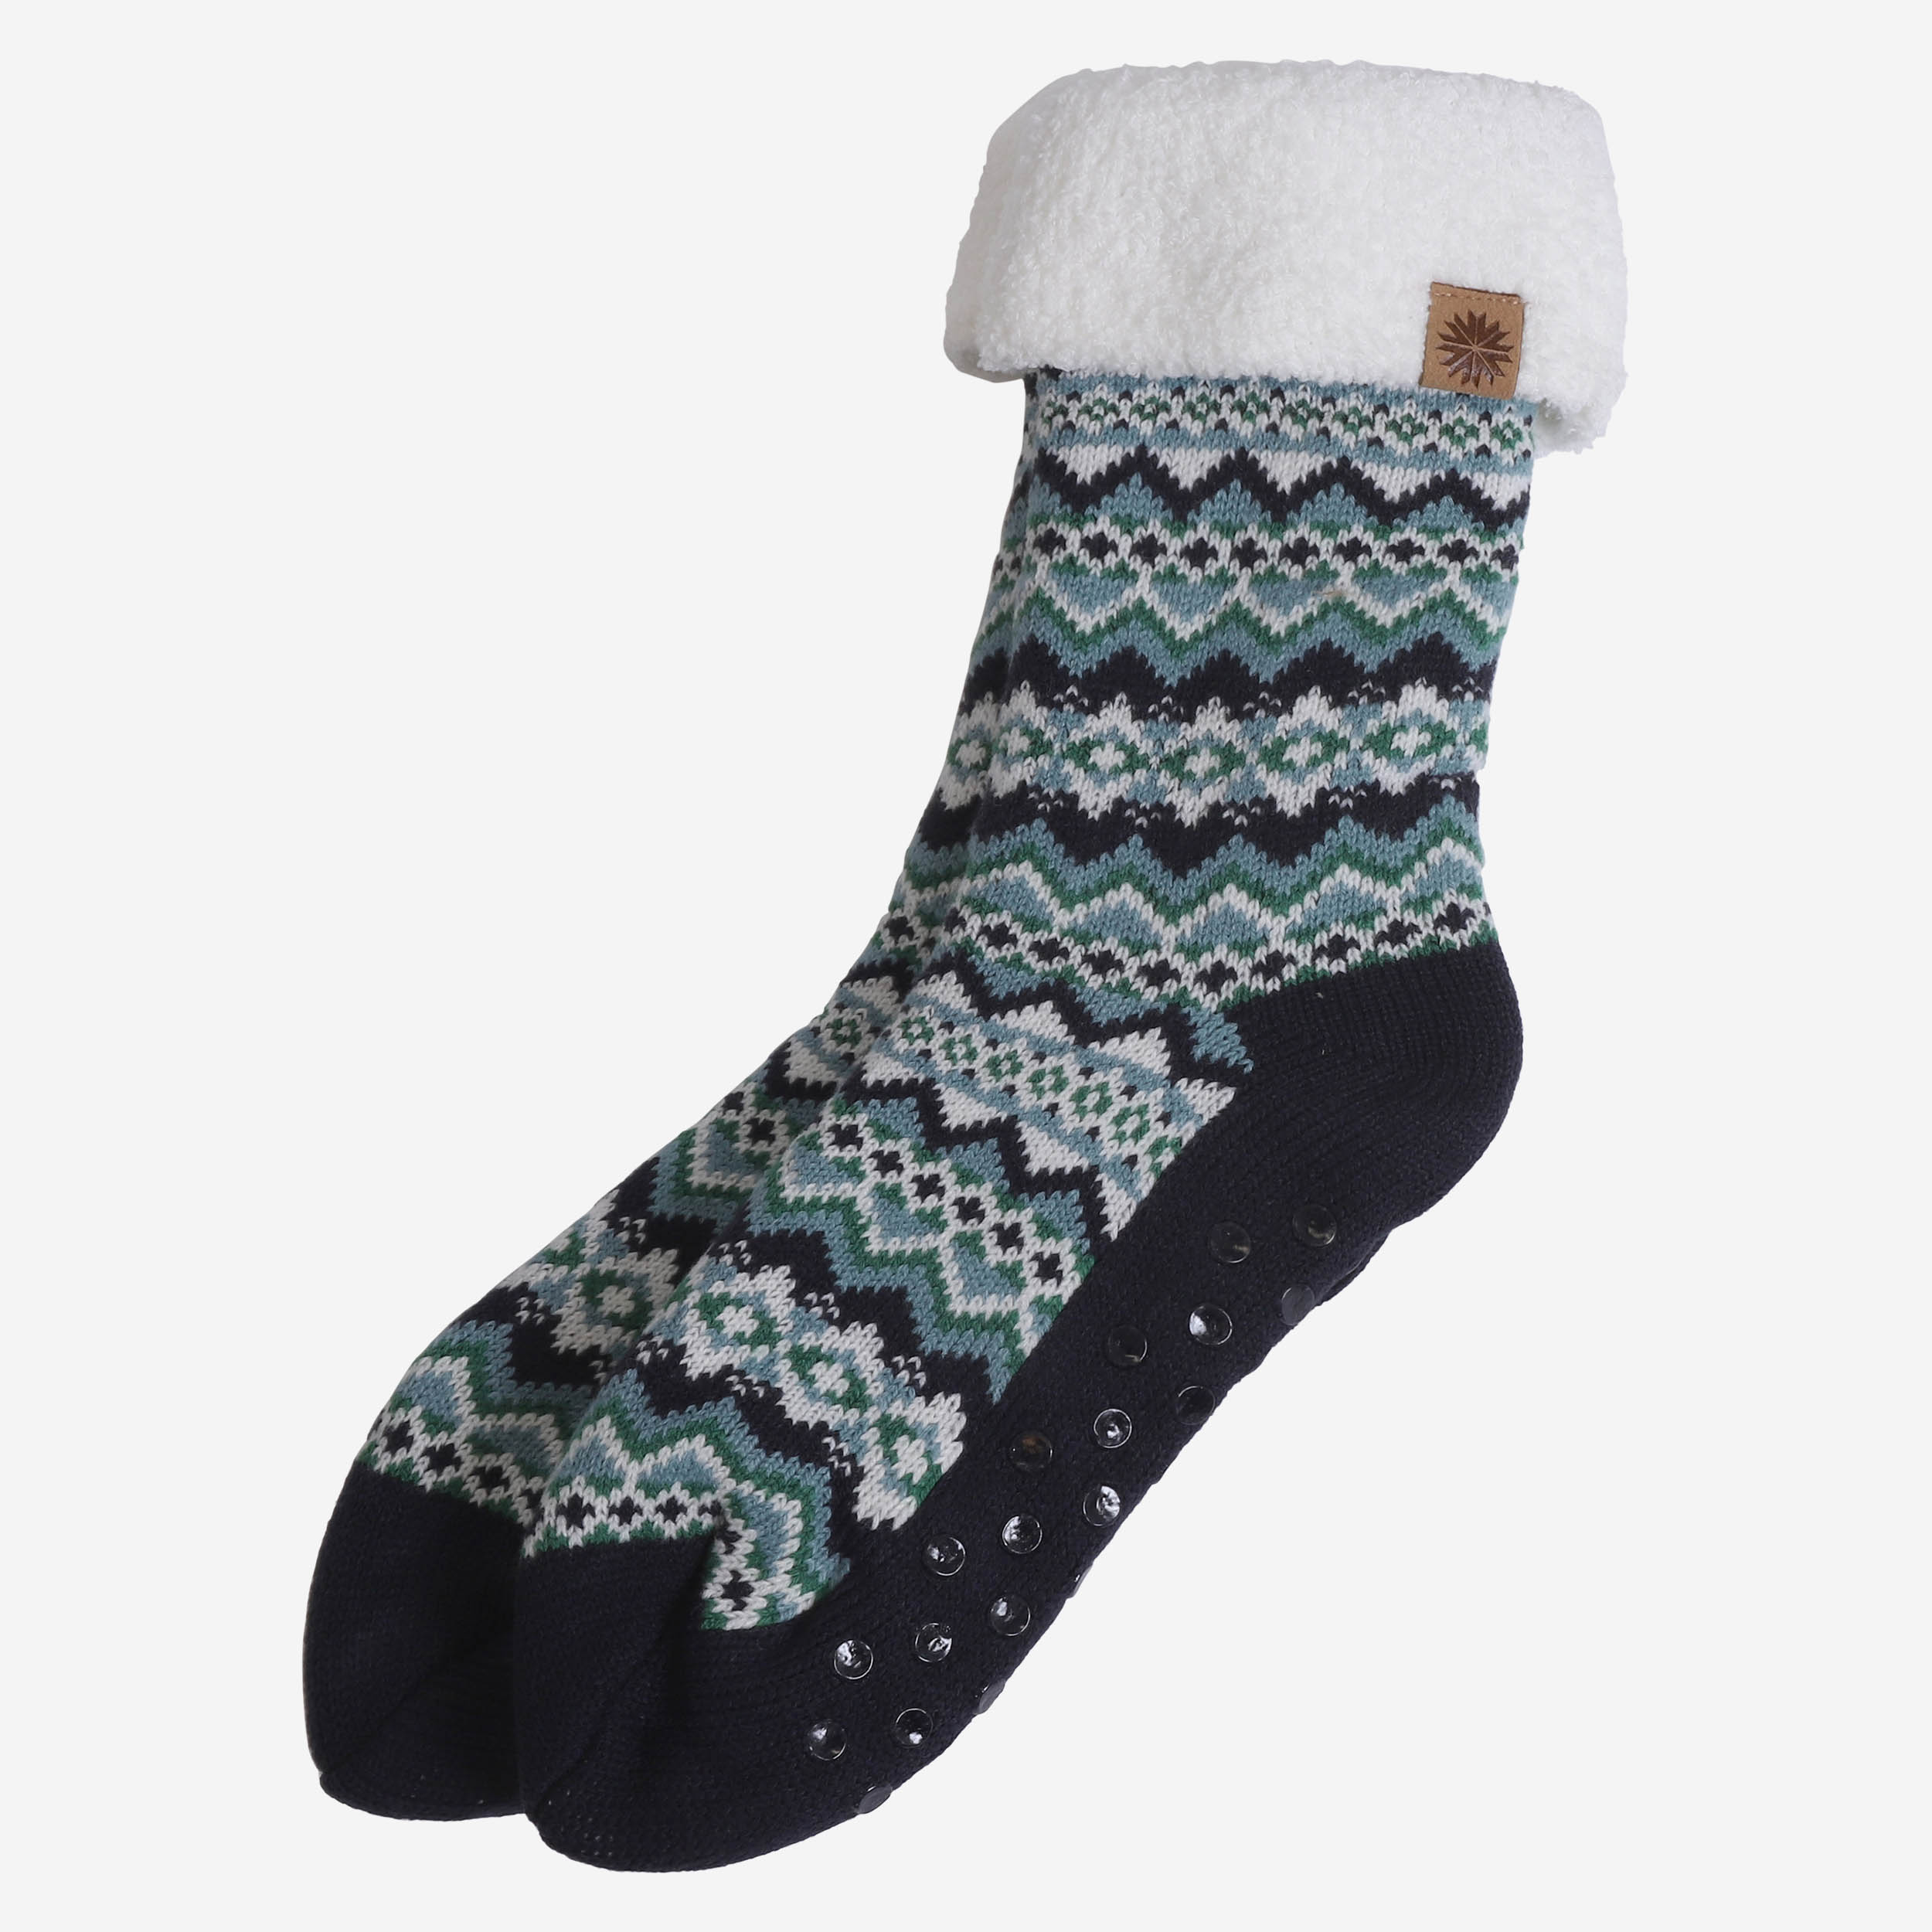 Selfell Nordic fuzzy socks with grip